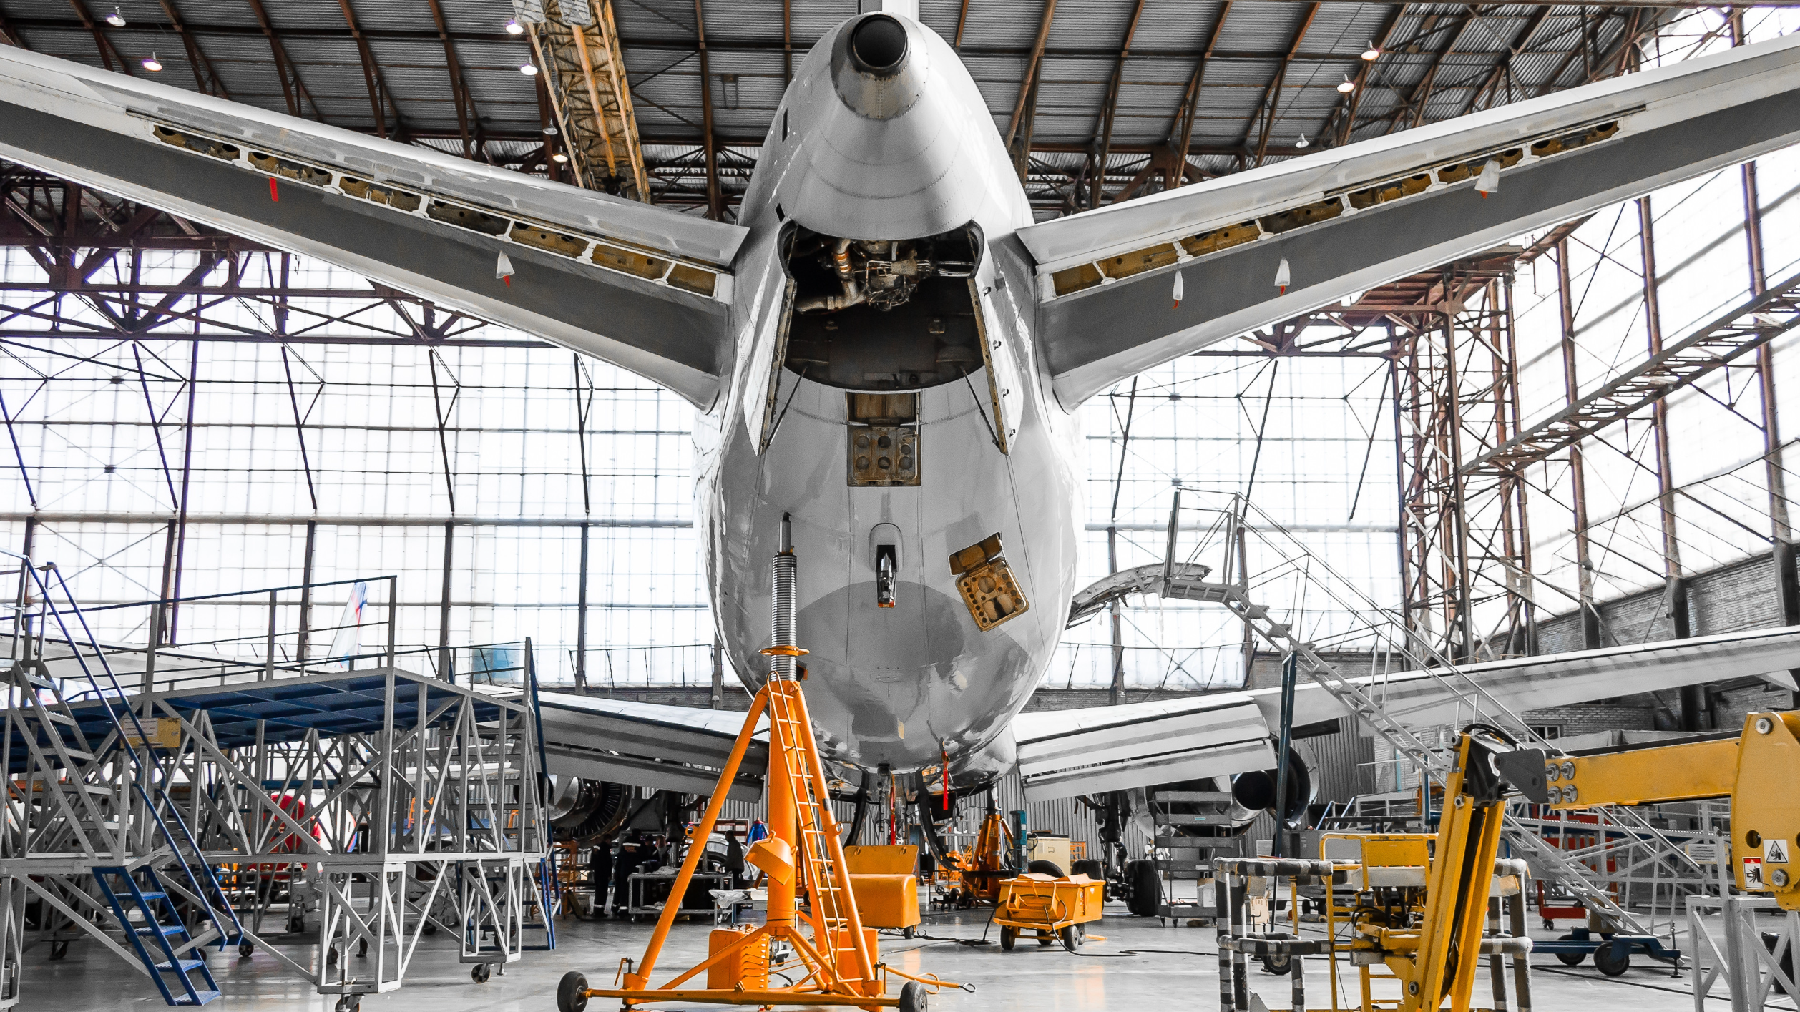 Stock image of an airplane in an airplane hanger